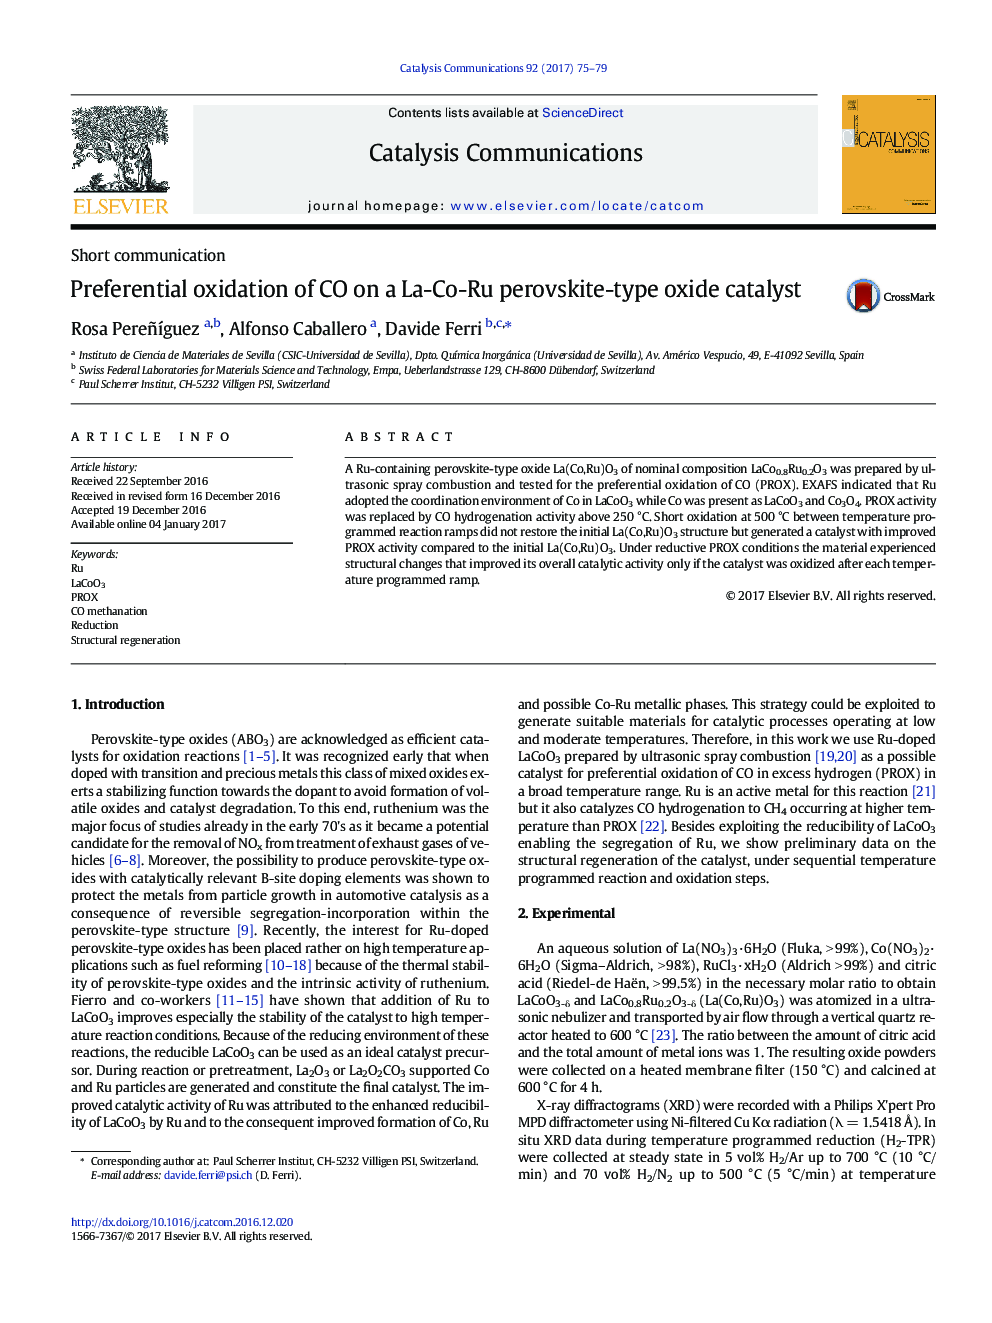 Preferential oxidation of CO on a La-Co-Ru perovskite-type oxide catalyst